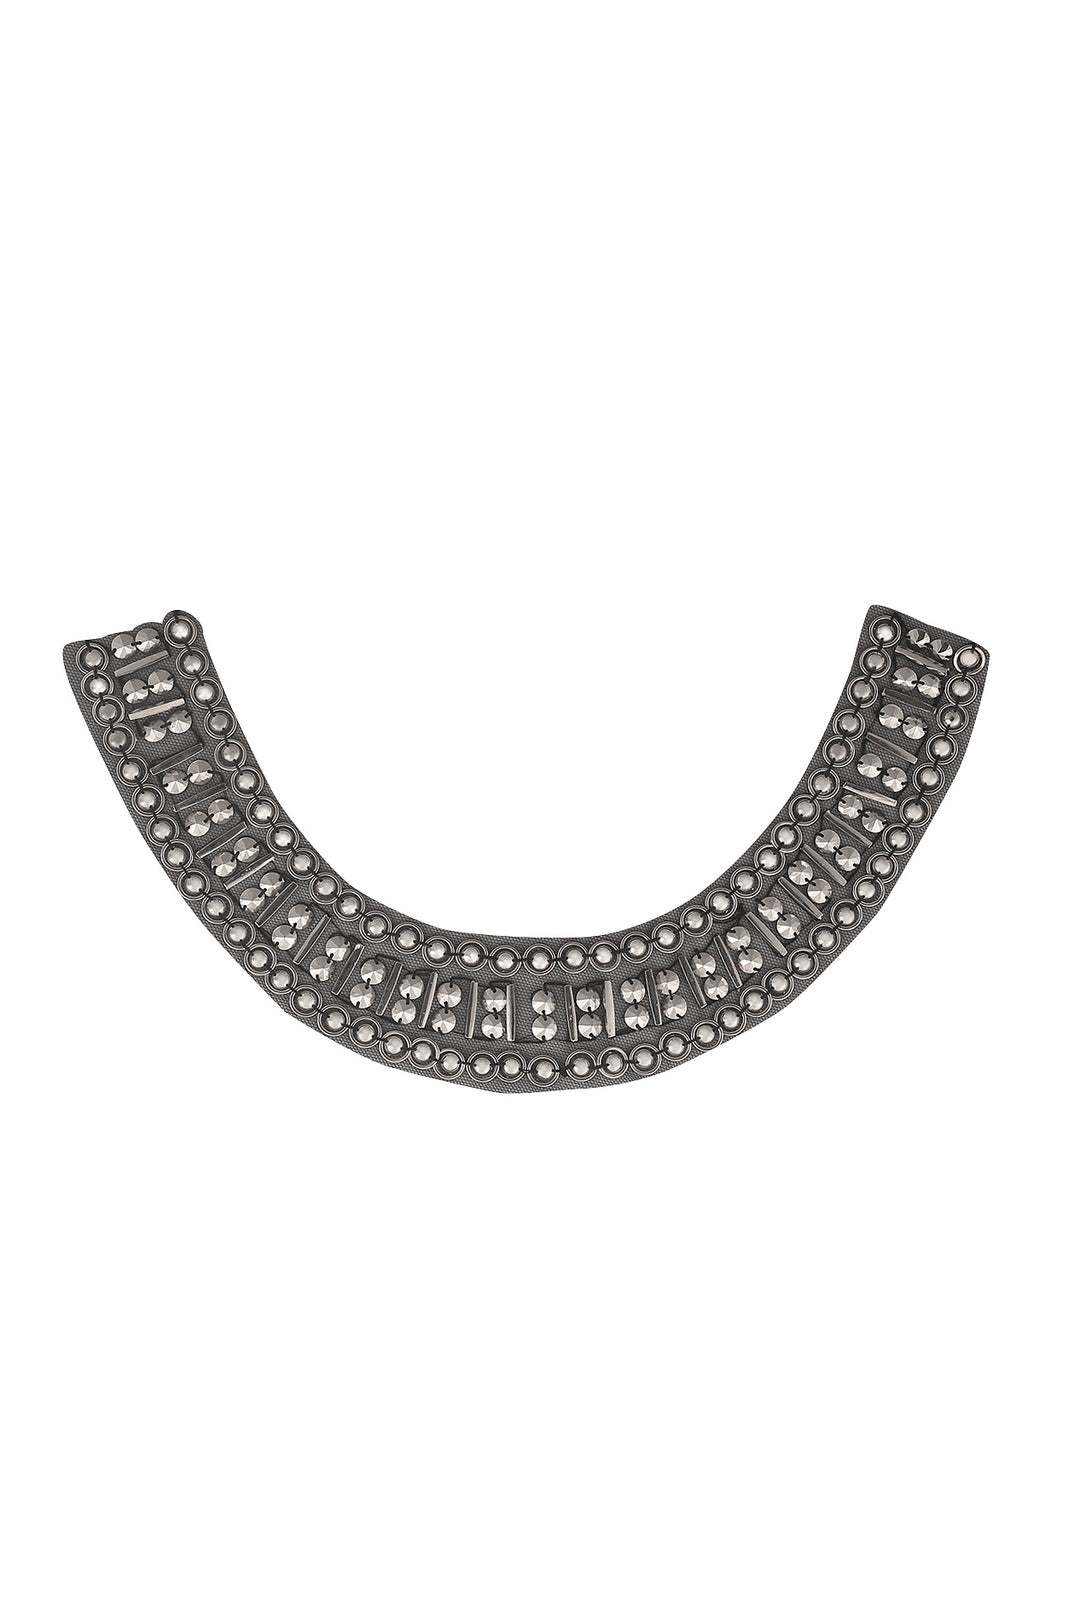 Beaded Collar with Silver Beaded Neck Trim